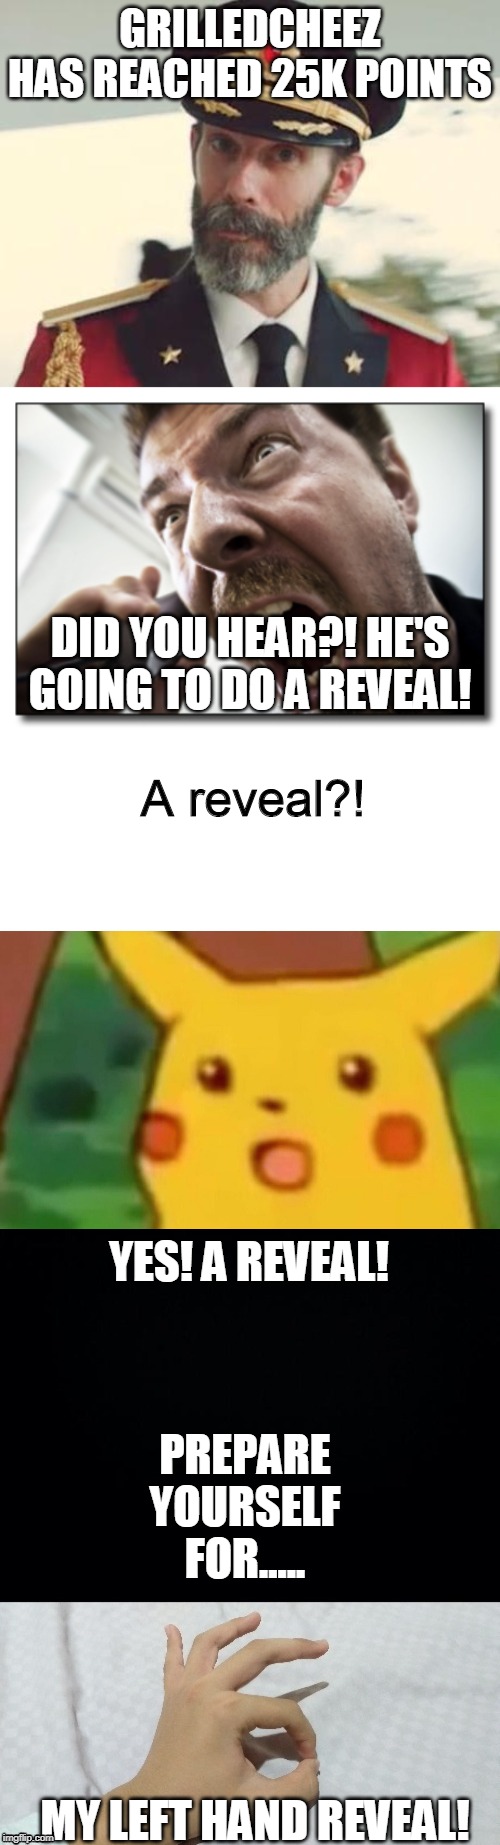 Since I got 1/4 of 1 mil! | GRILLEDCHEEZ HAS REACHED 25K POINTS; DID YOU HEAR?! HE'S GOING TO DO A REVEAL! A reveal?! YES! A REVEAL! PREPARE YOURSELF FOR..... MY LEFT HAND REVEAL! | image tagged in memes,shouter,captain obvious,surprised pikachu,funny,reveal | made w/ Imgflip meme maker